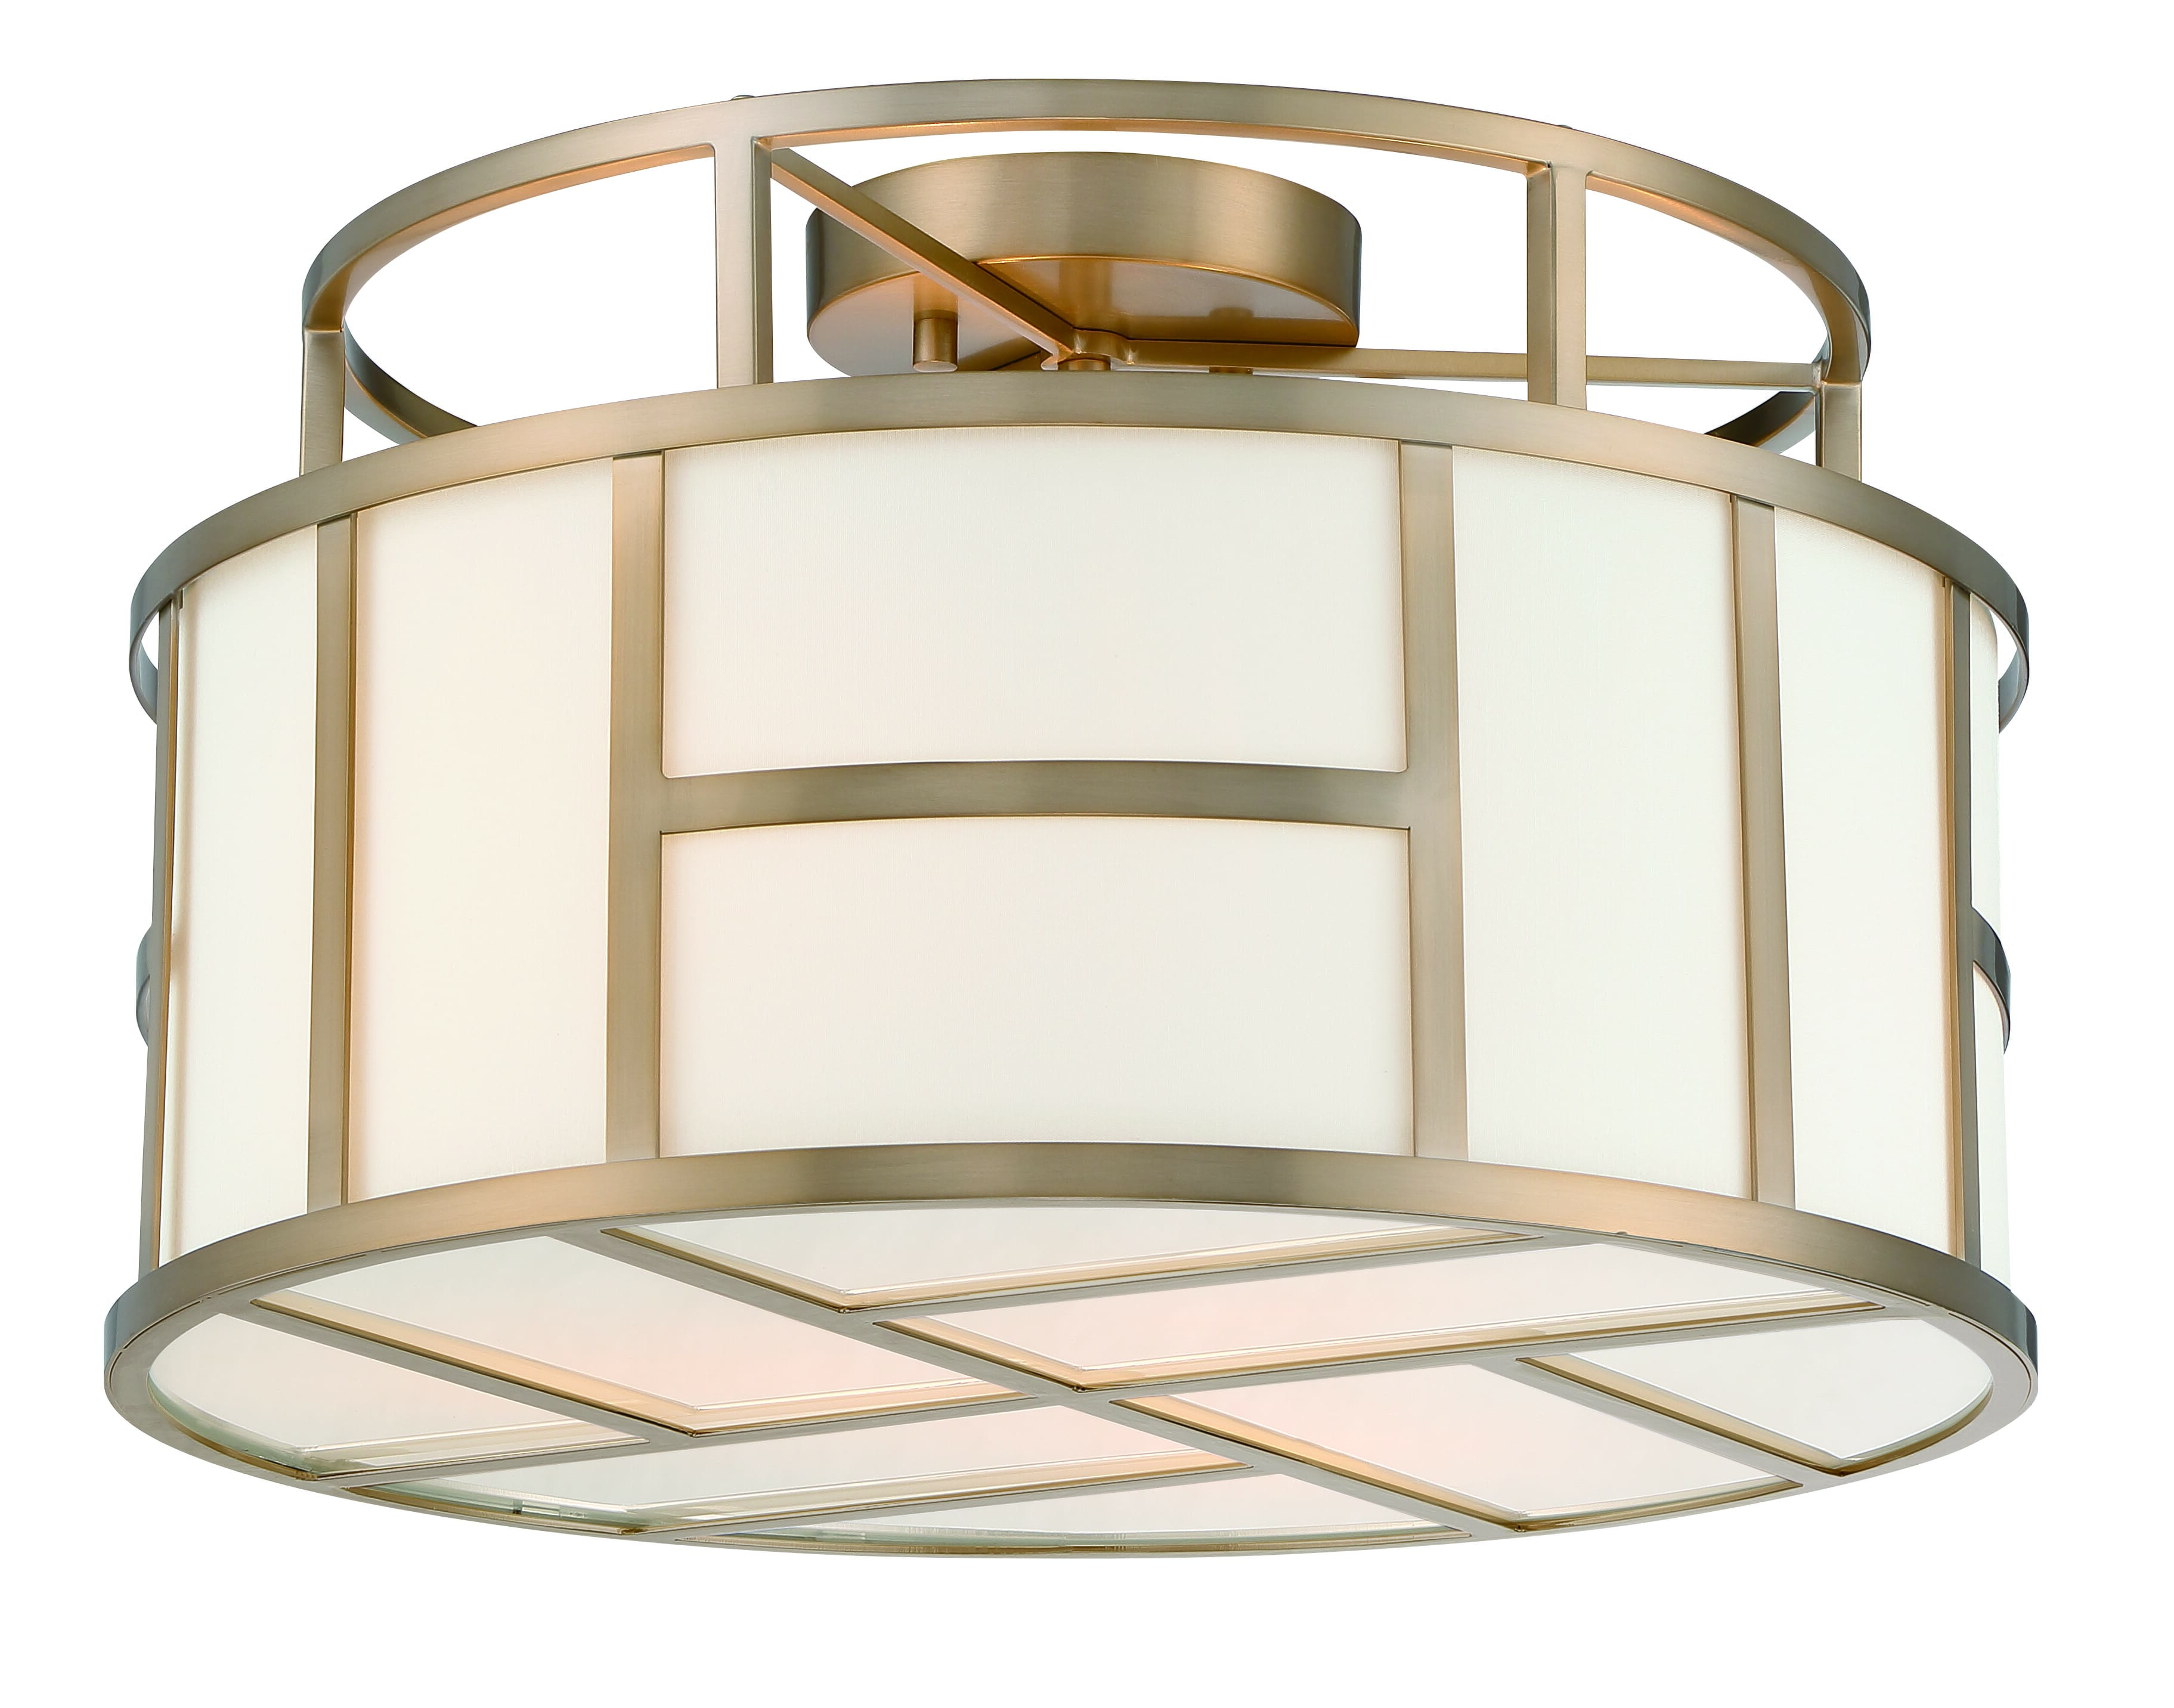 Libby Langdon for Crystorama Danielson 3-Light 17" Ceiling Light in Vibrant Gold